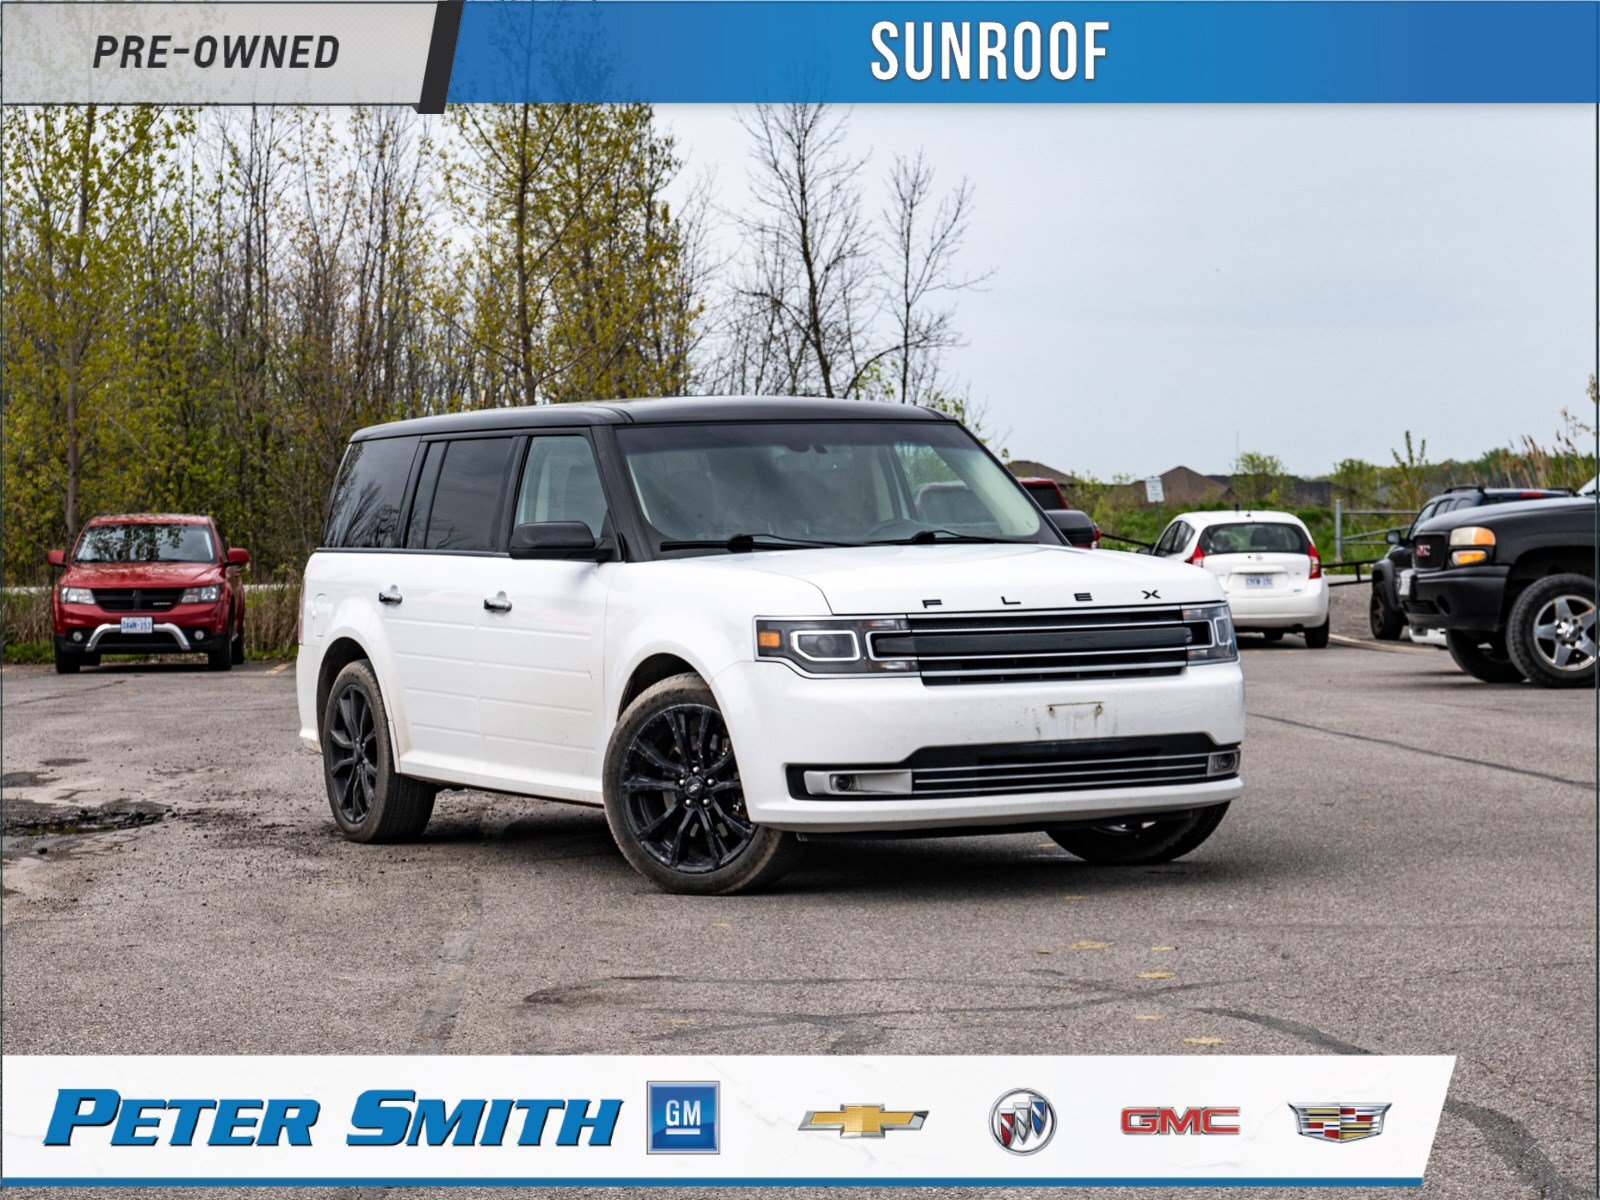 2019 Ford Flex Limited - Sunroof | 3rd Row Seating